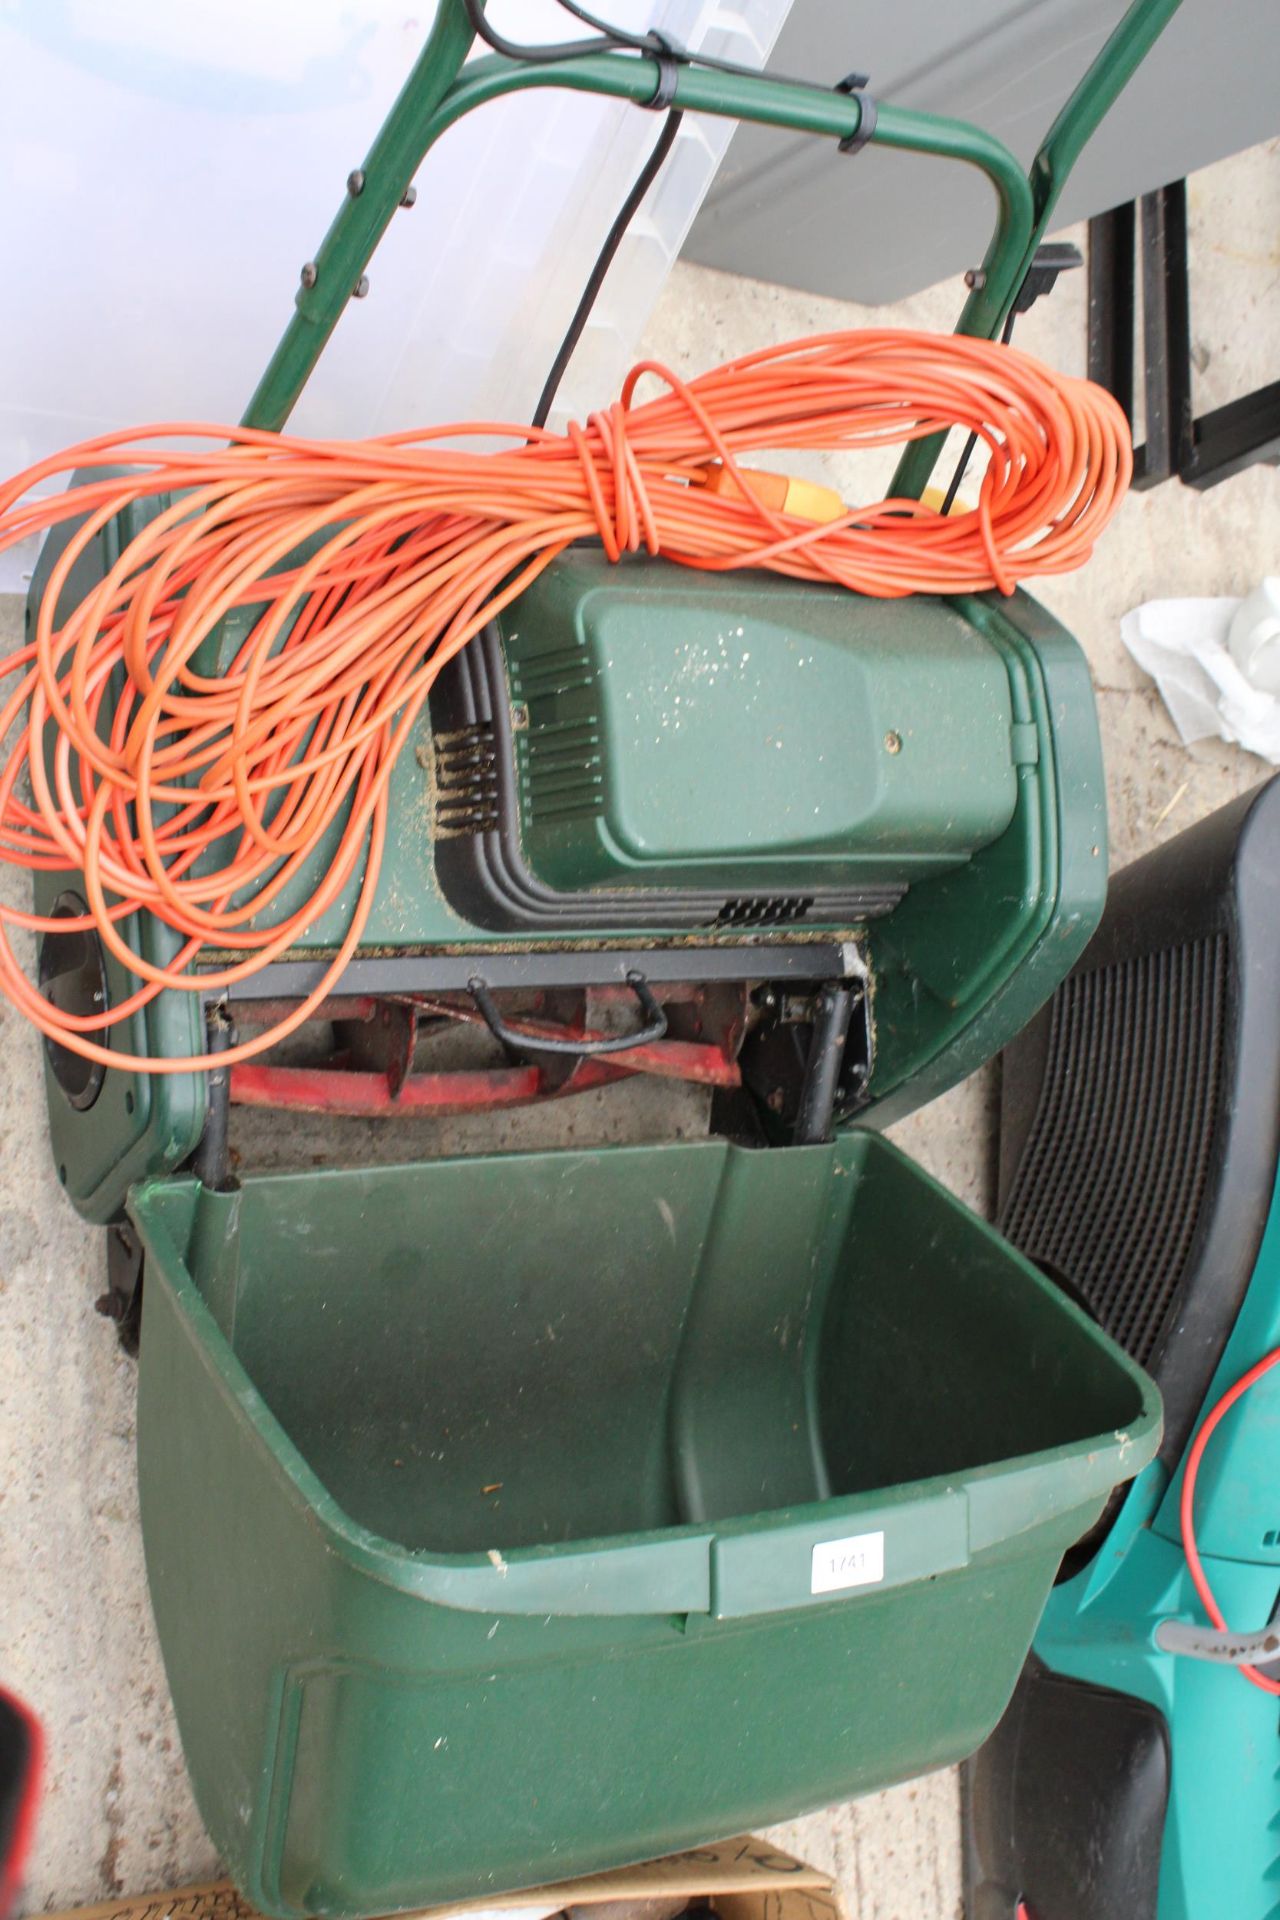 AN ELECTRIC LAWN MOWER WITH A BOX OF SPARES TO INCLUDE A LAWN RAKE CARTRIDGE ETC - Image 3 of 4